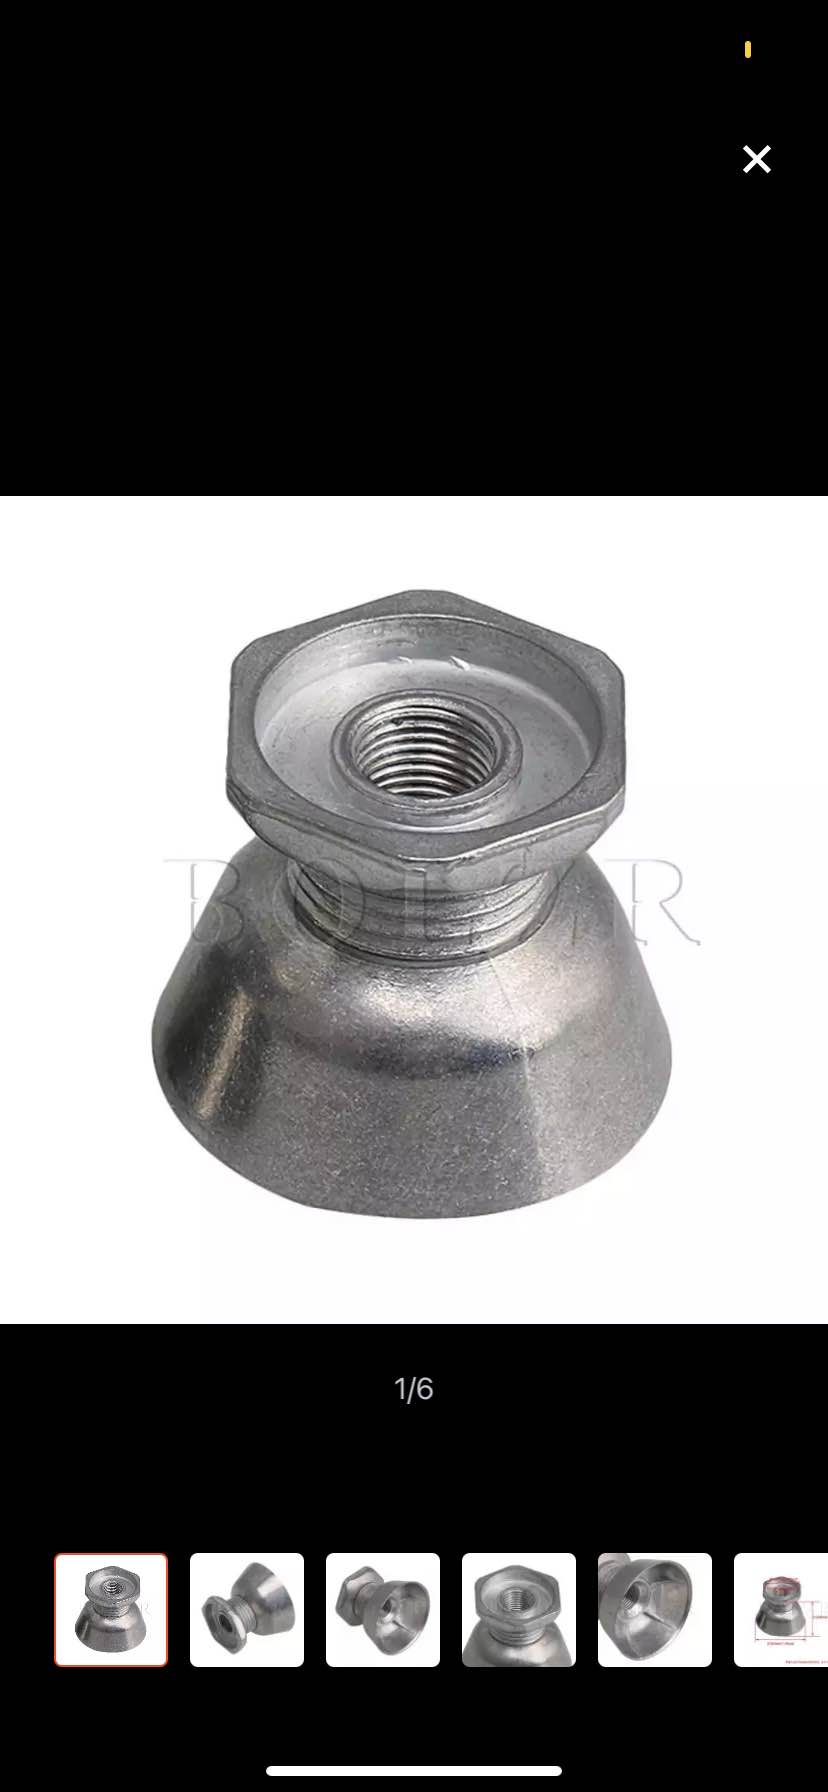 8066184 Dryer Motor Pulley Replacement for Whirlpool 8066184 AH2378182 EA2378182 PS2378182 W10290531 8066184 WP8066184 LP15838 